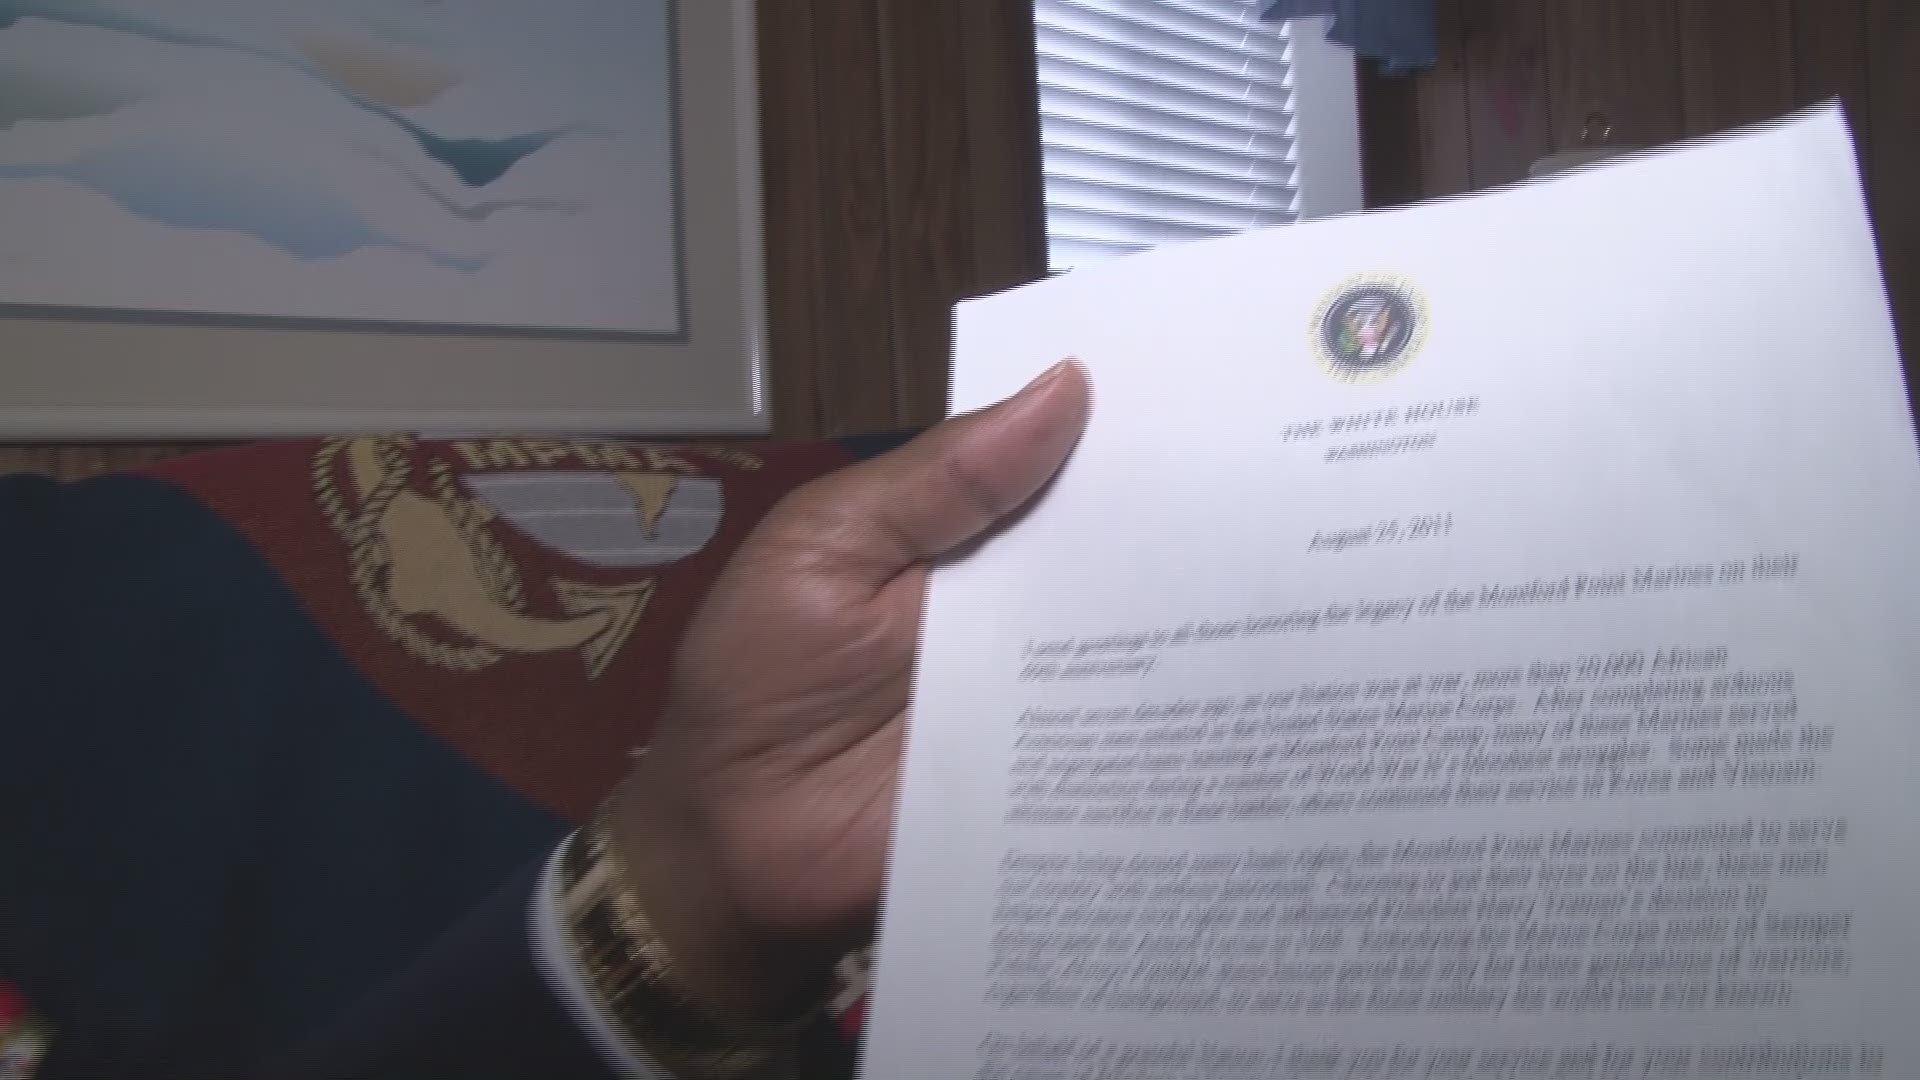 Staff Sgt. Groves and Staff Sgt. Griffin received their congressional gold medal, an award that thousands of Montford Point Marines don't have but are eligible for. SSgt. Groves reads a letter from Pres. Obama.